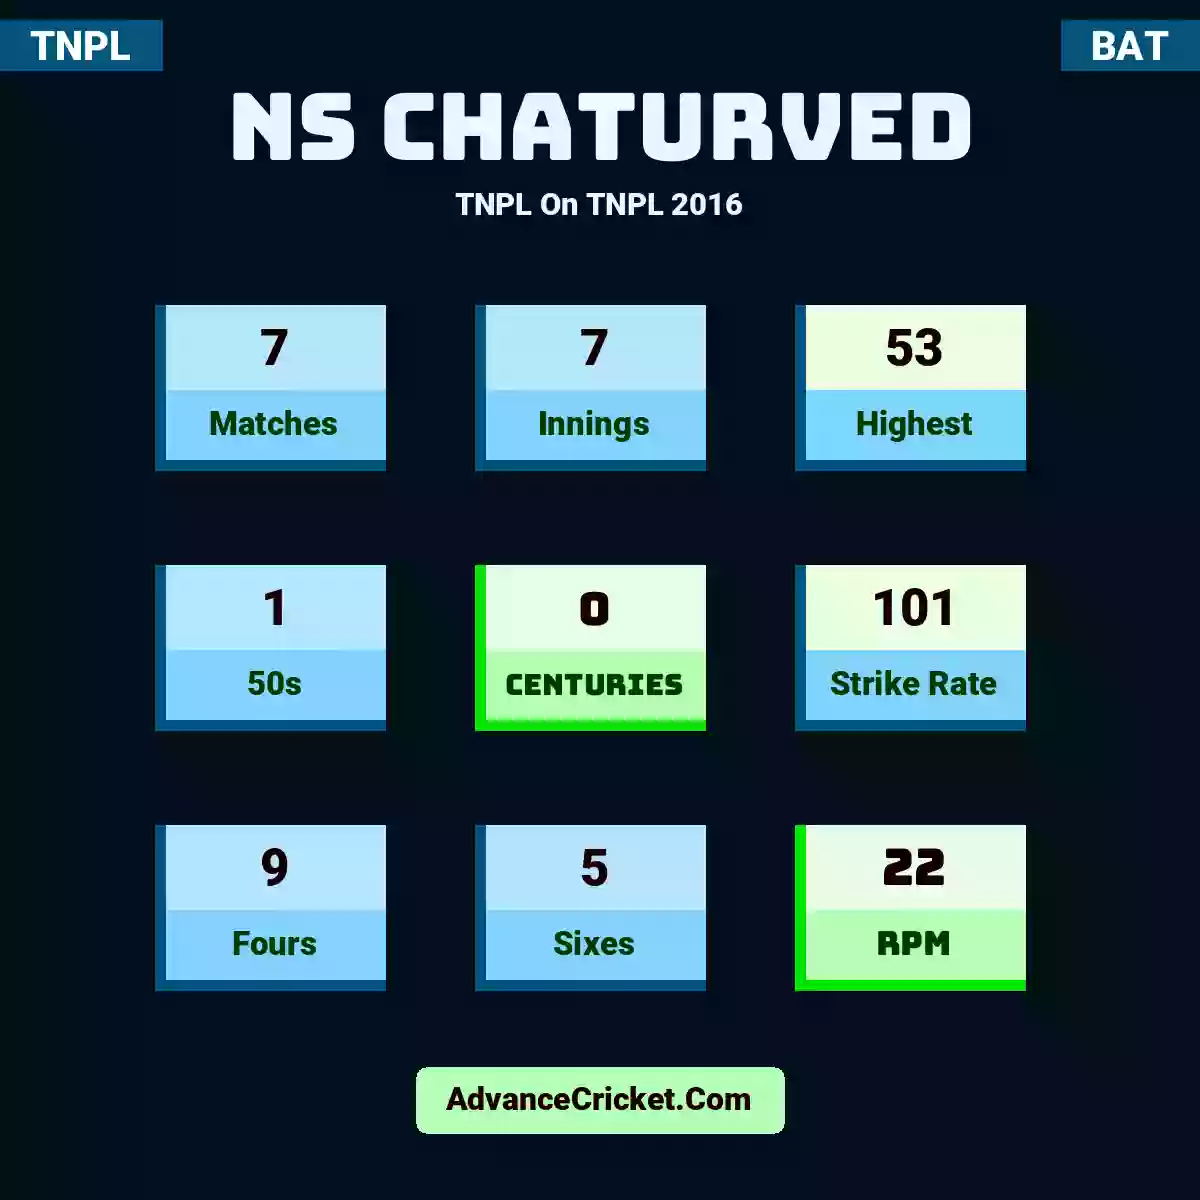 NS Chaturved TNPL  On TNPL 2016, NS Chaturved played 7 matches, scored 53 runs as highest, 1 half-centuries, and 0 centuries, with a strike rate of 101. N.Chaturved hit 9 fours and 5 sixes, with an RPM of 22.